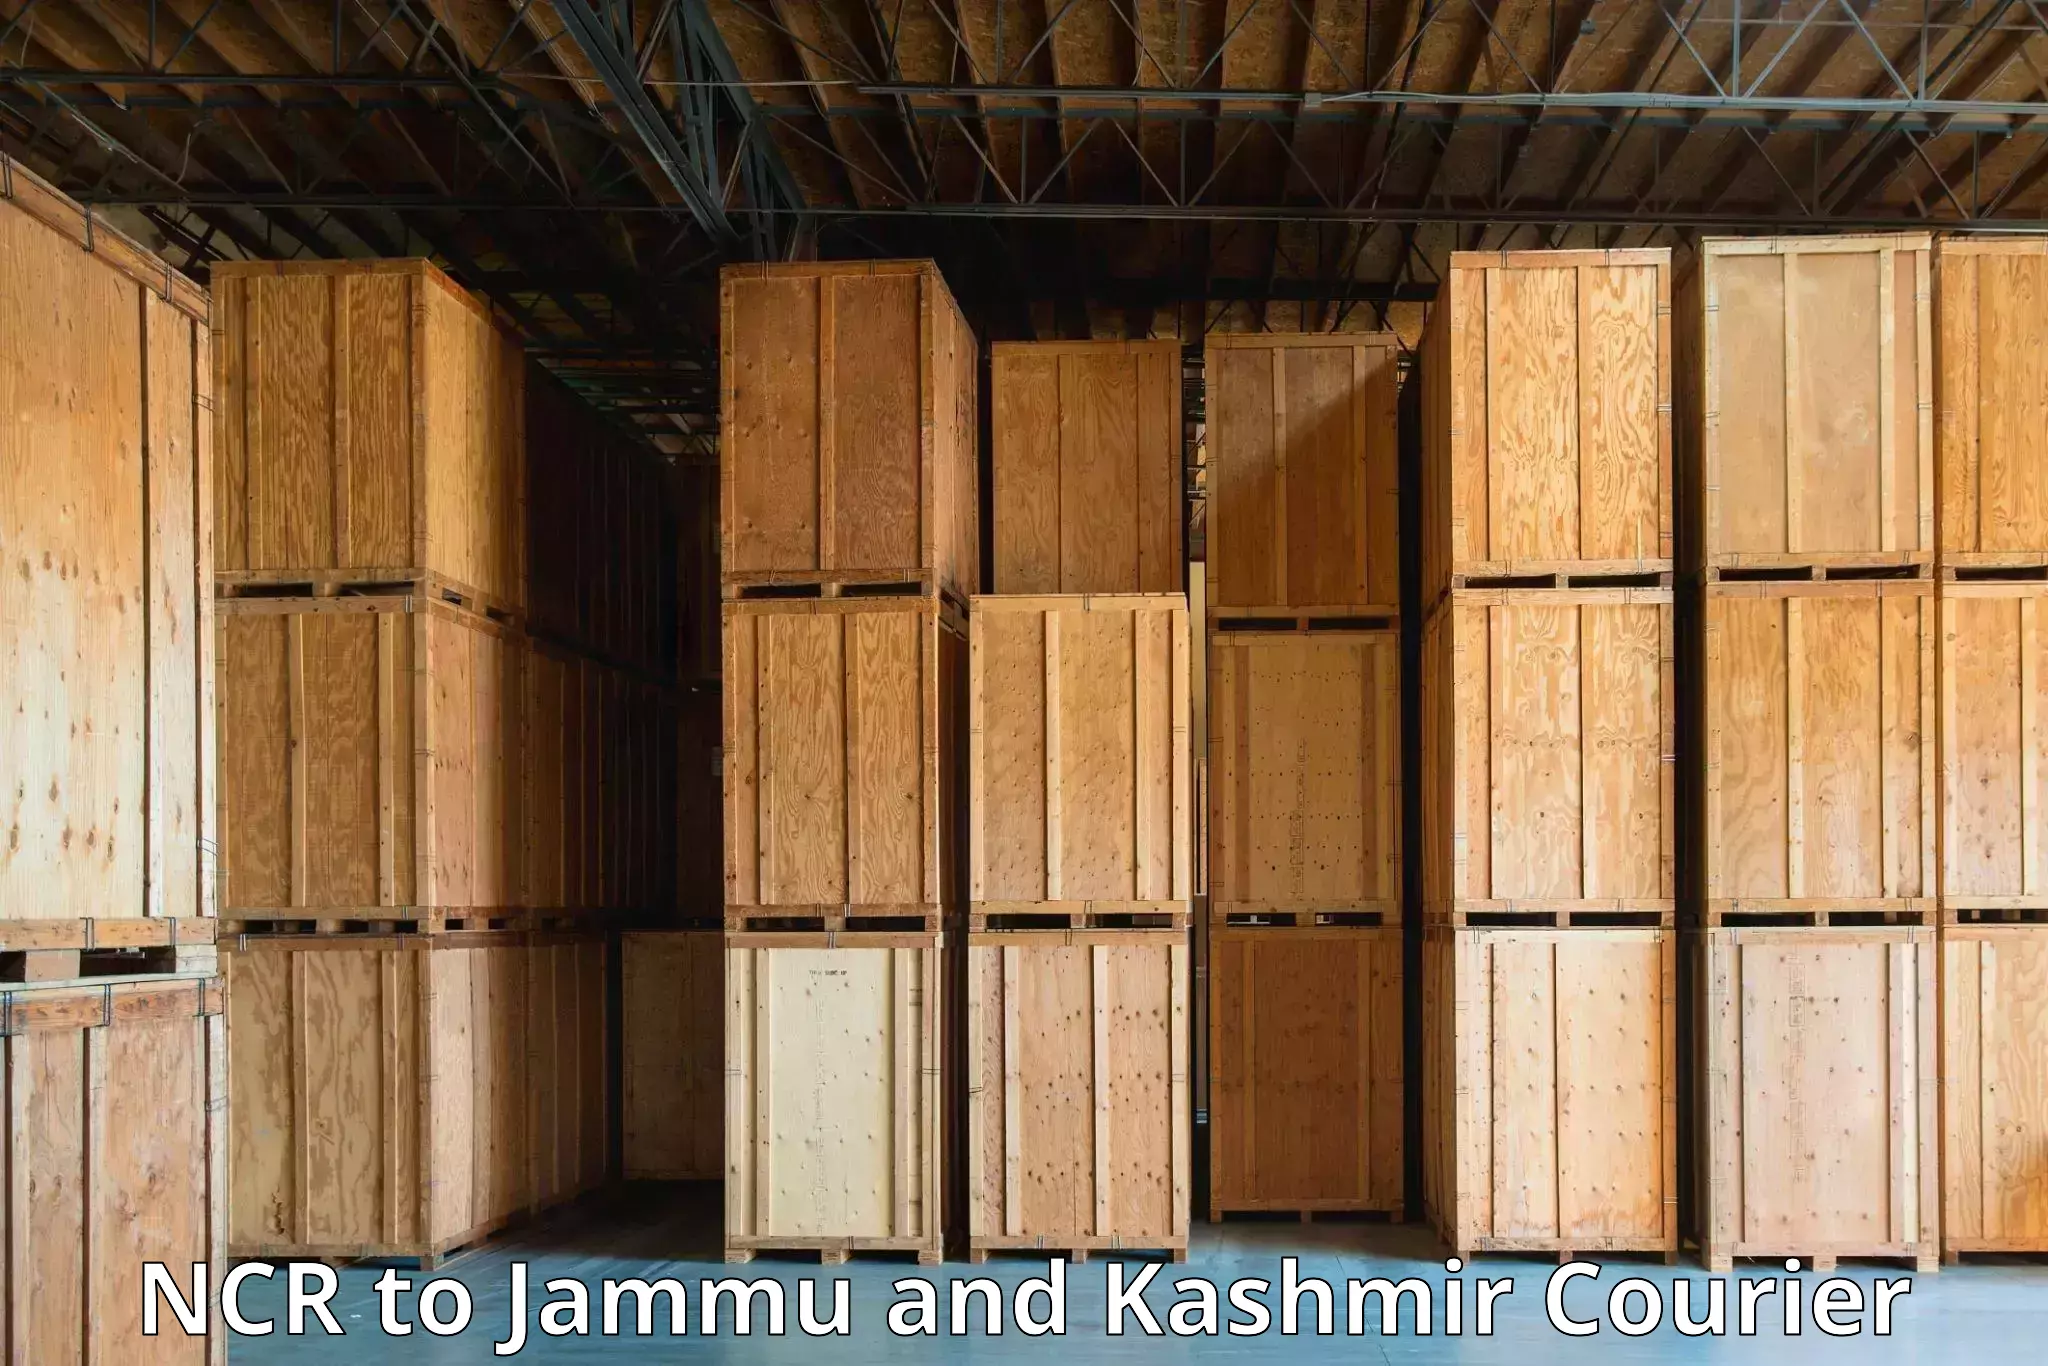 Nationwide courier service NCR to University of Jammu